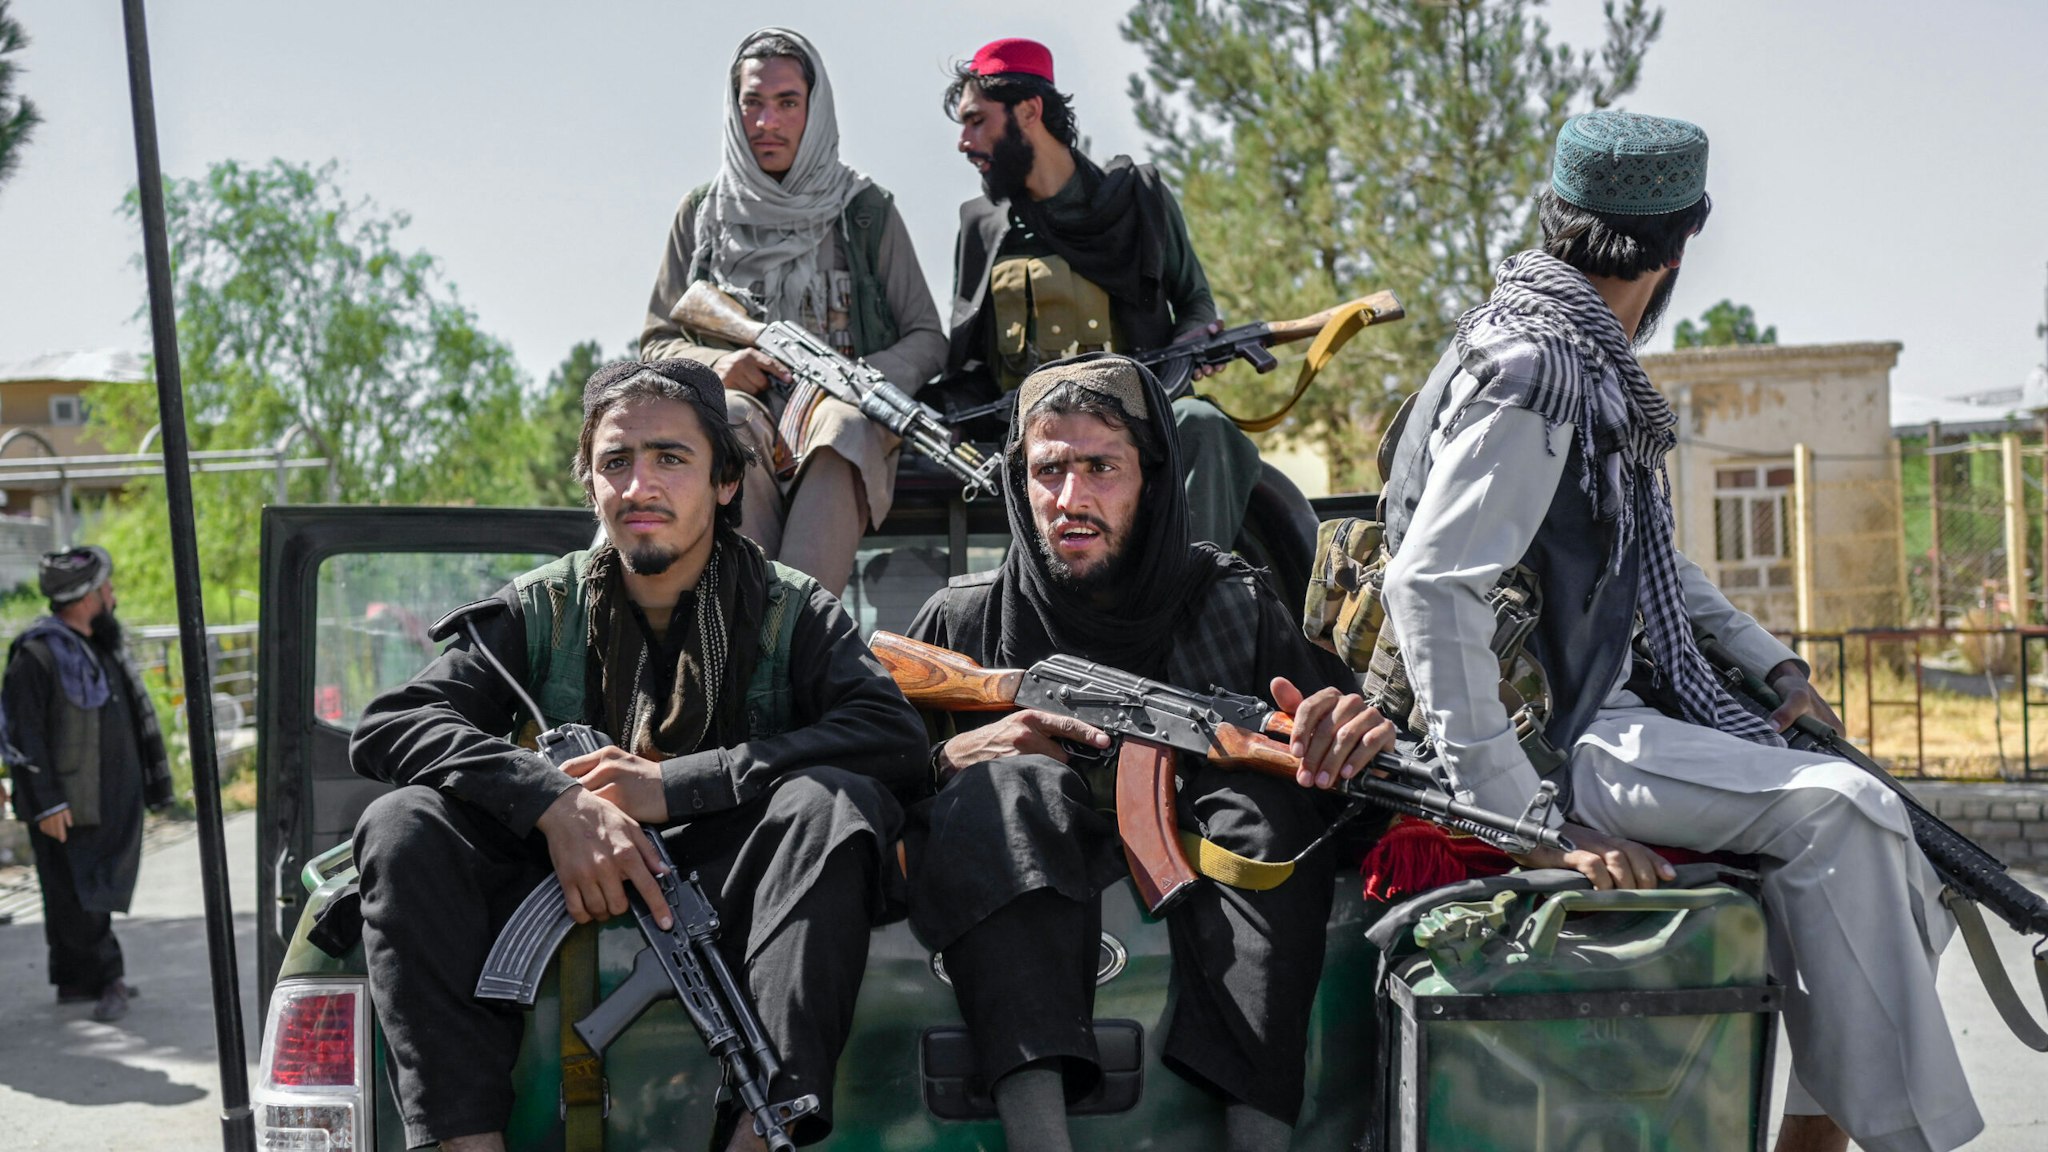 Members of the Taliban drive in the Pul-e-Charkhi prison in Kabul on September 16, 2021.